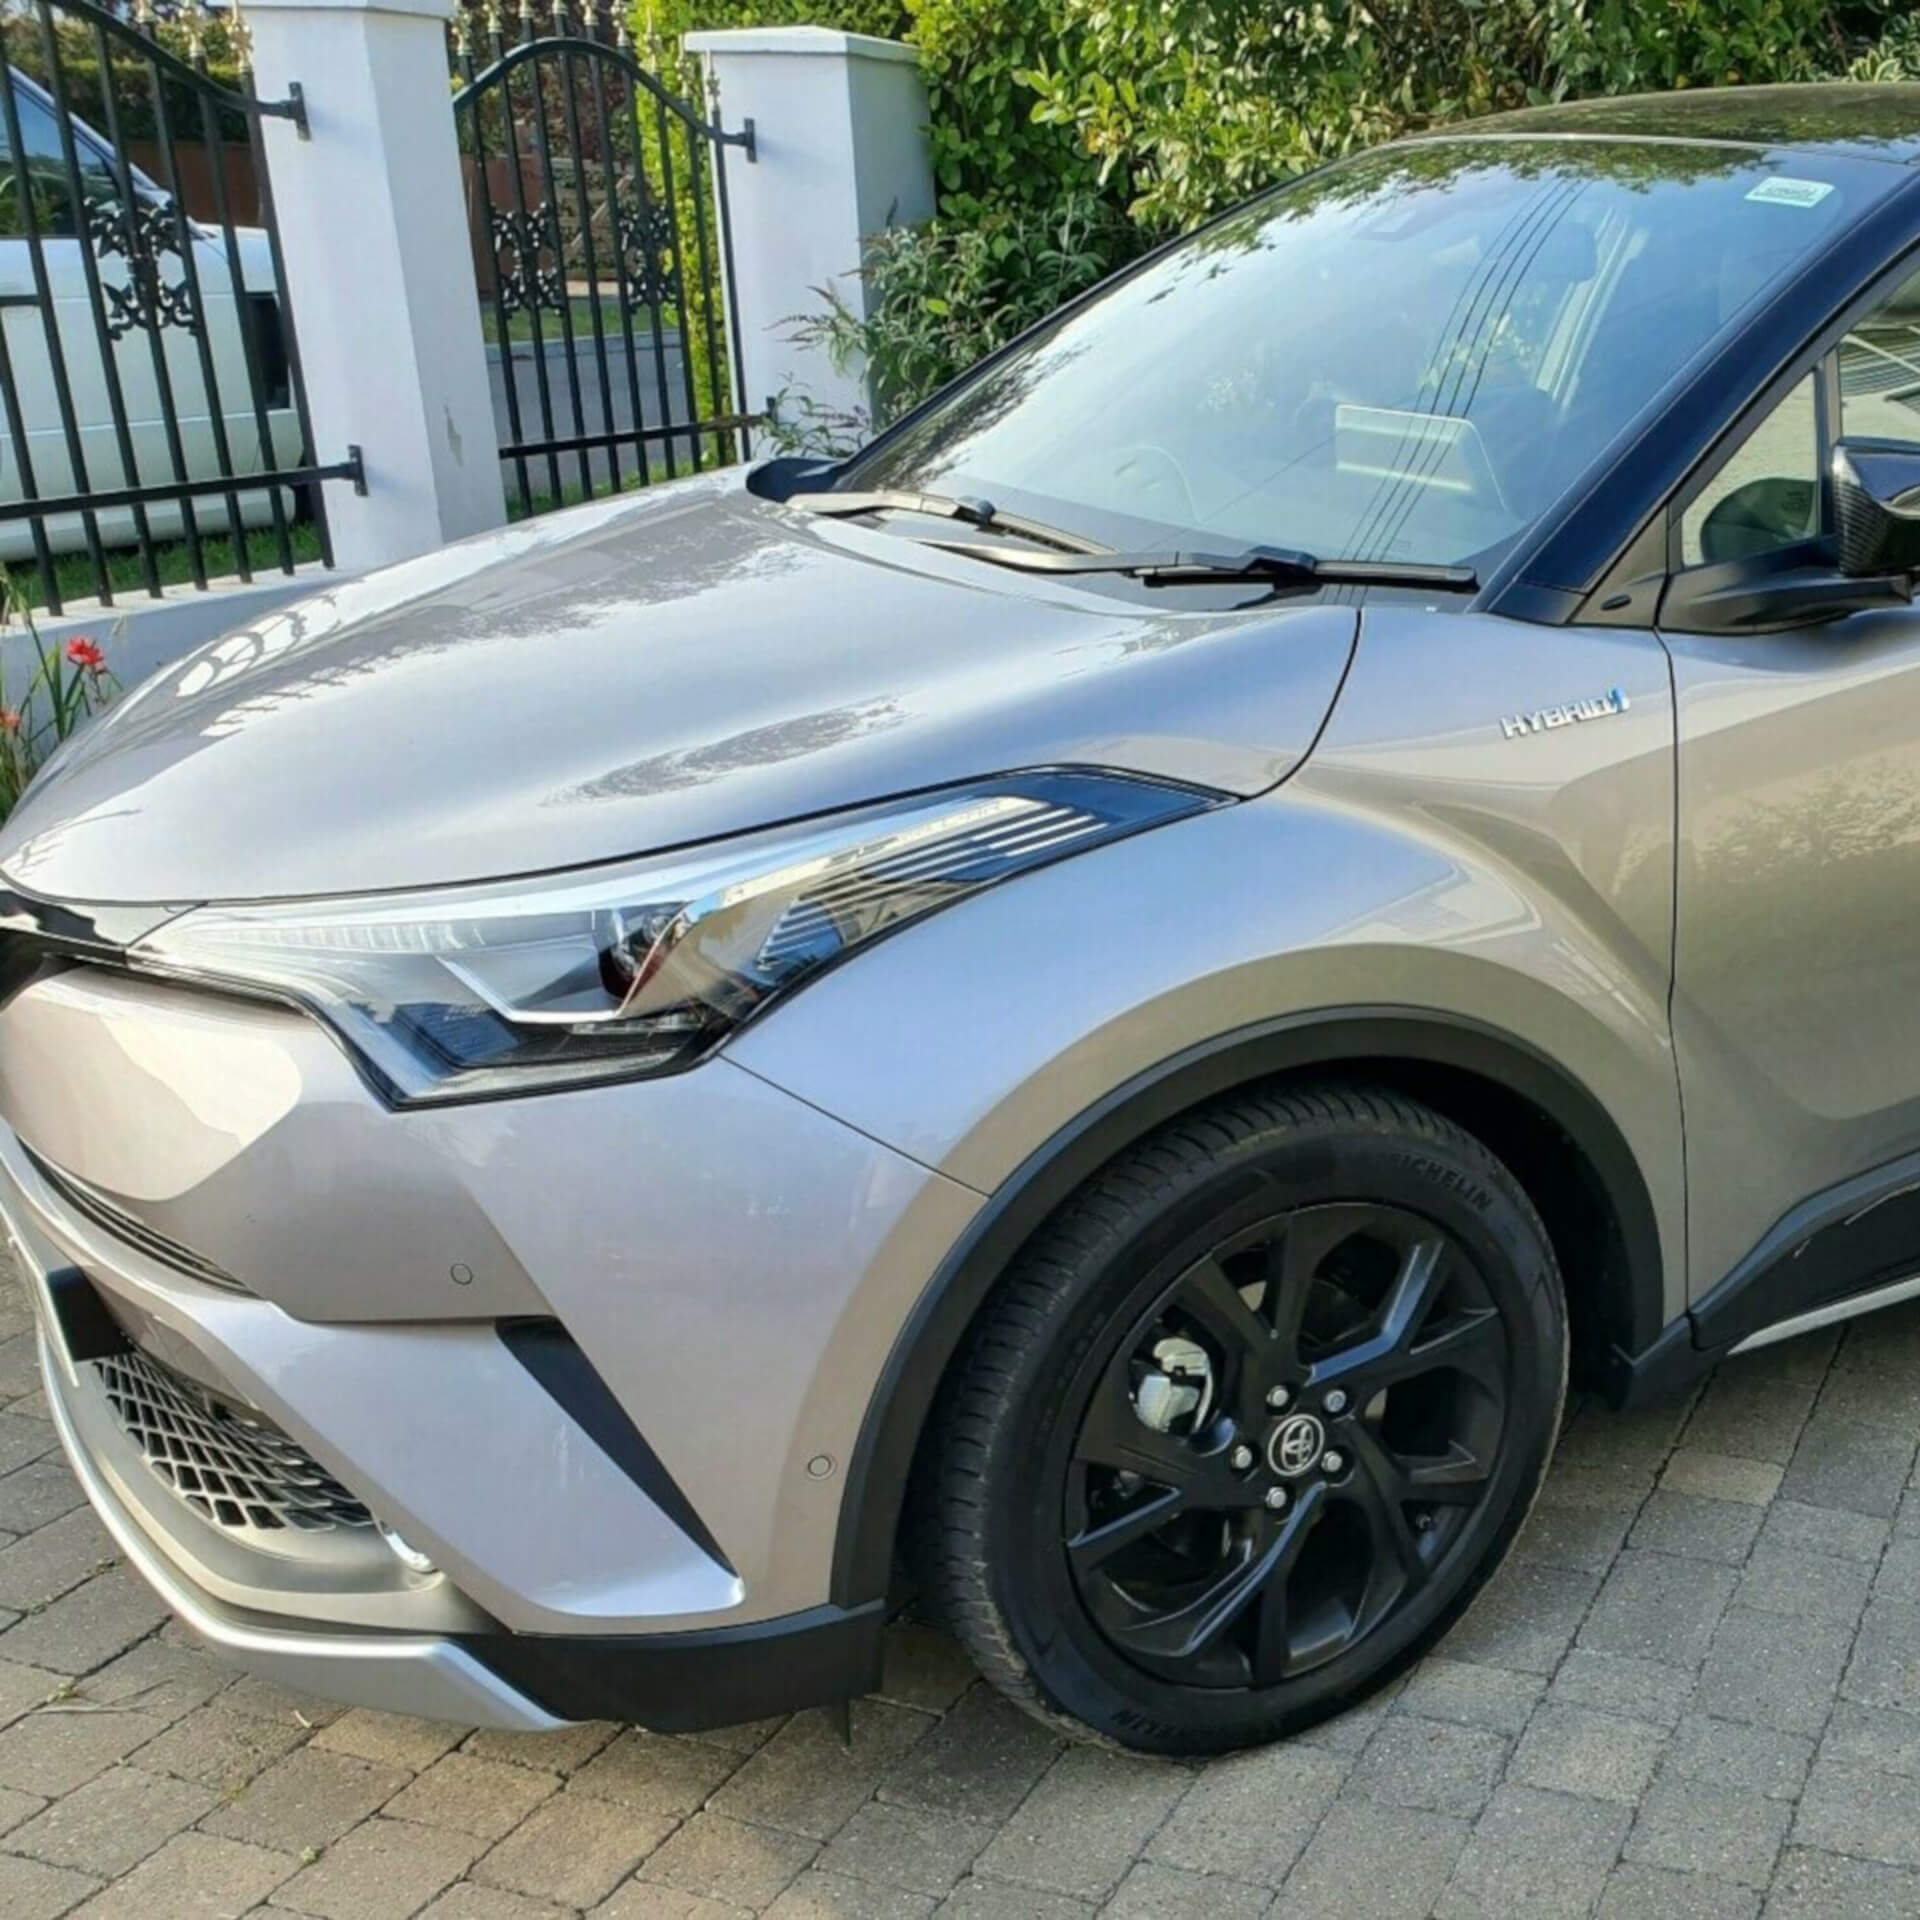 Direct4x4 accessories for Toyota C-HR vehicles with a photo of a gold Toyota C-HR parked on a driveway in front of bushes